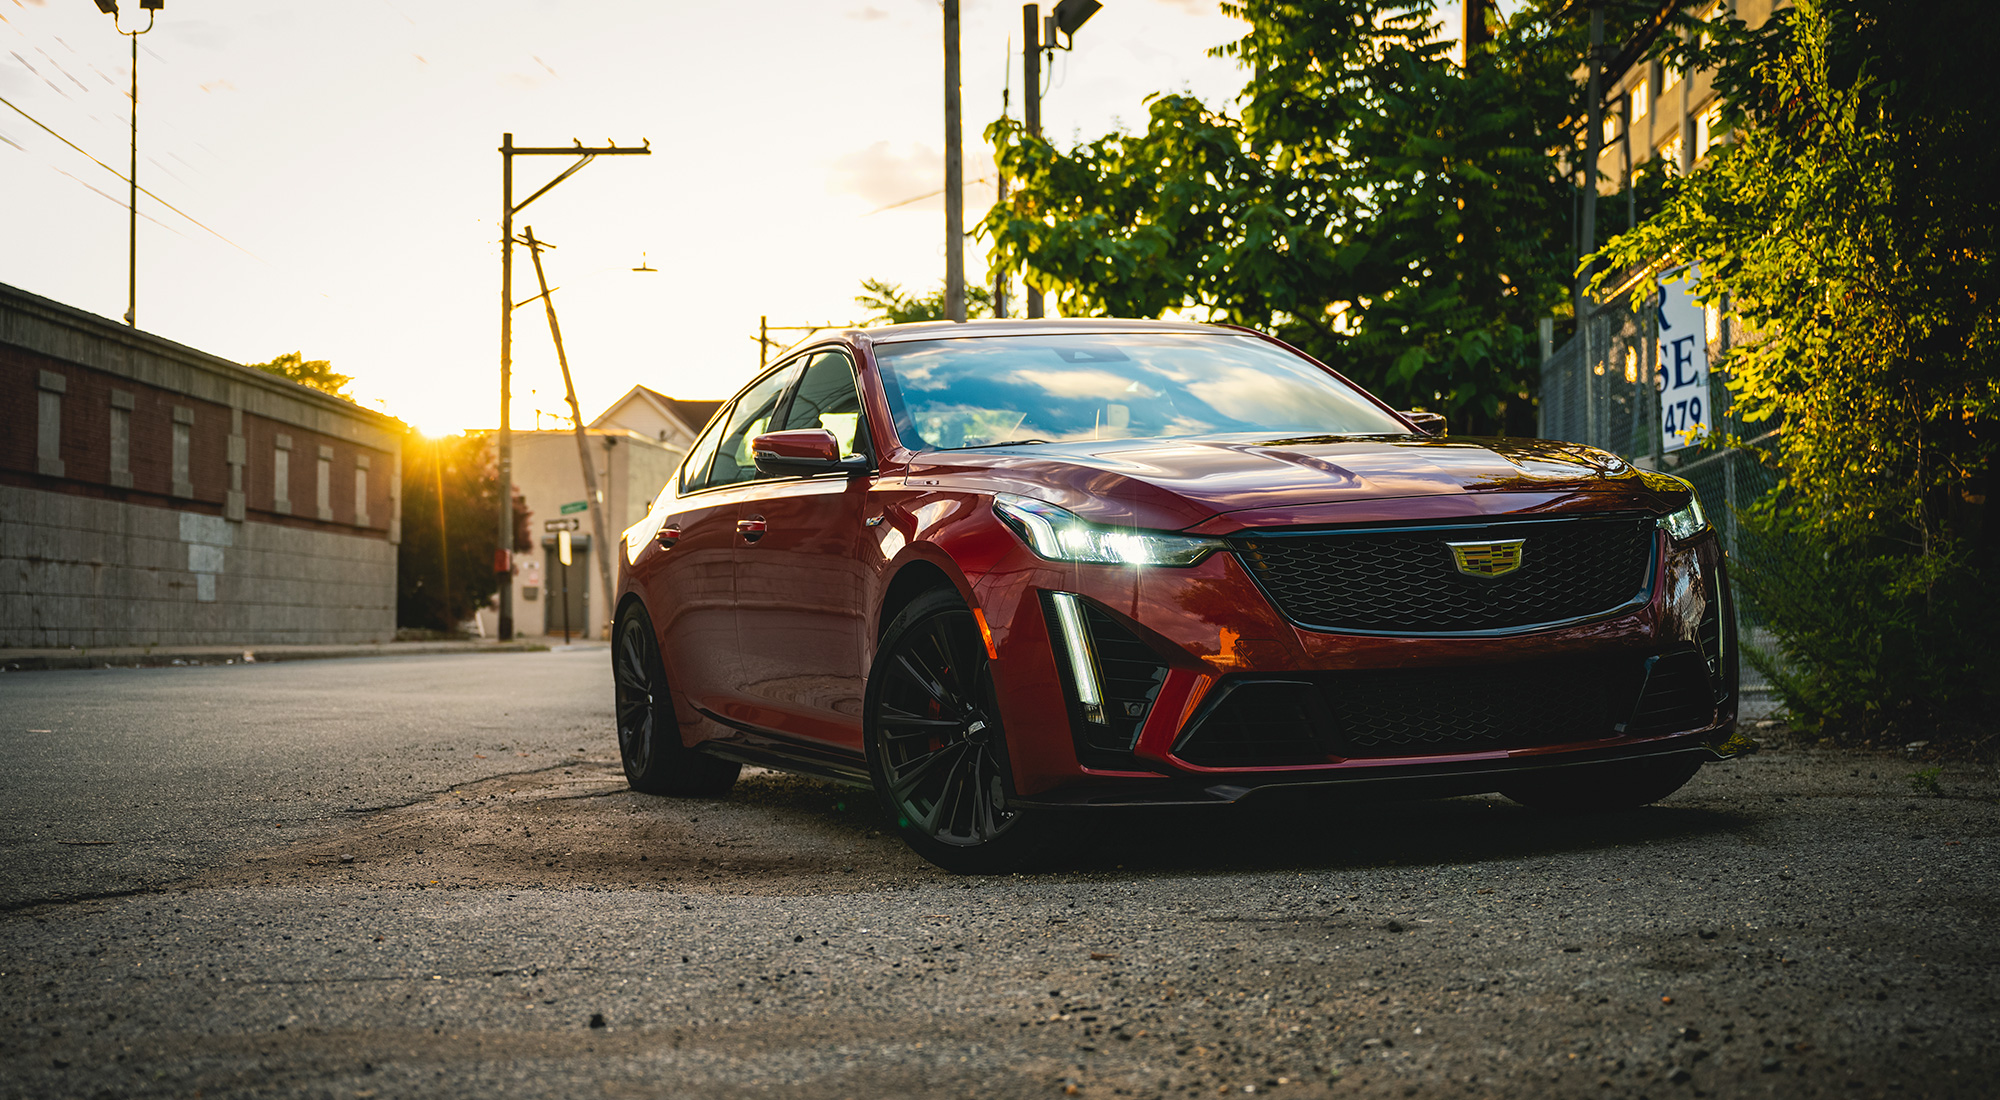 The Cadillac CT5-V Blackwing is the last great sports sedan